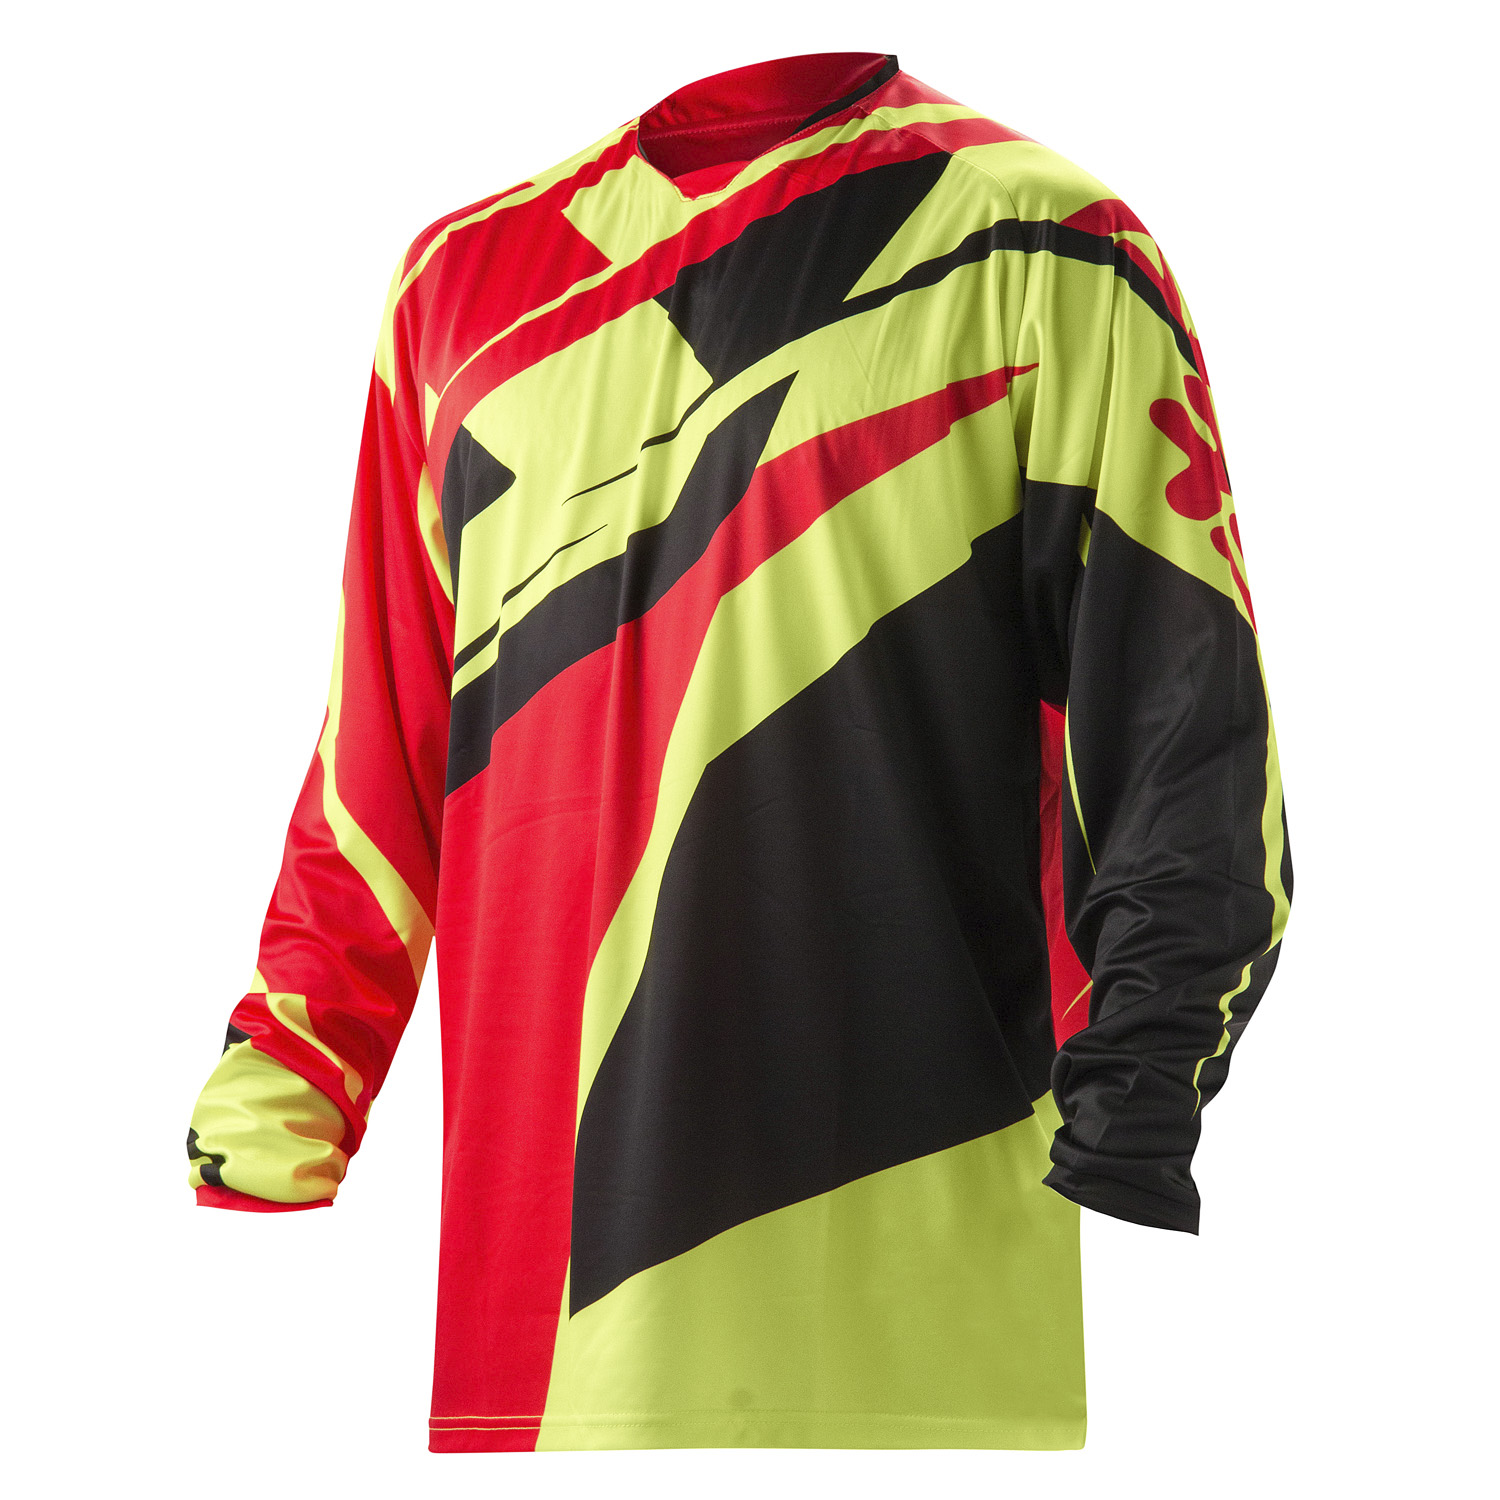 Acerbis Jersey Profile Red/Fluo Yellow